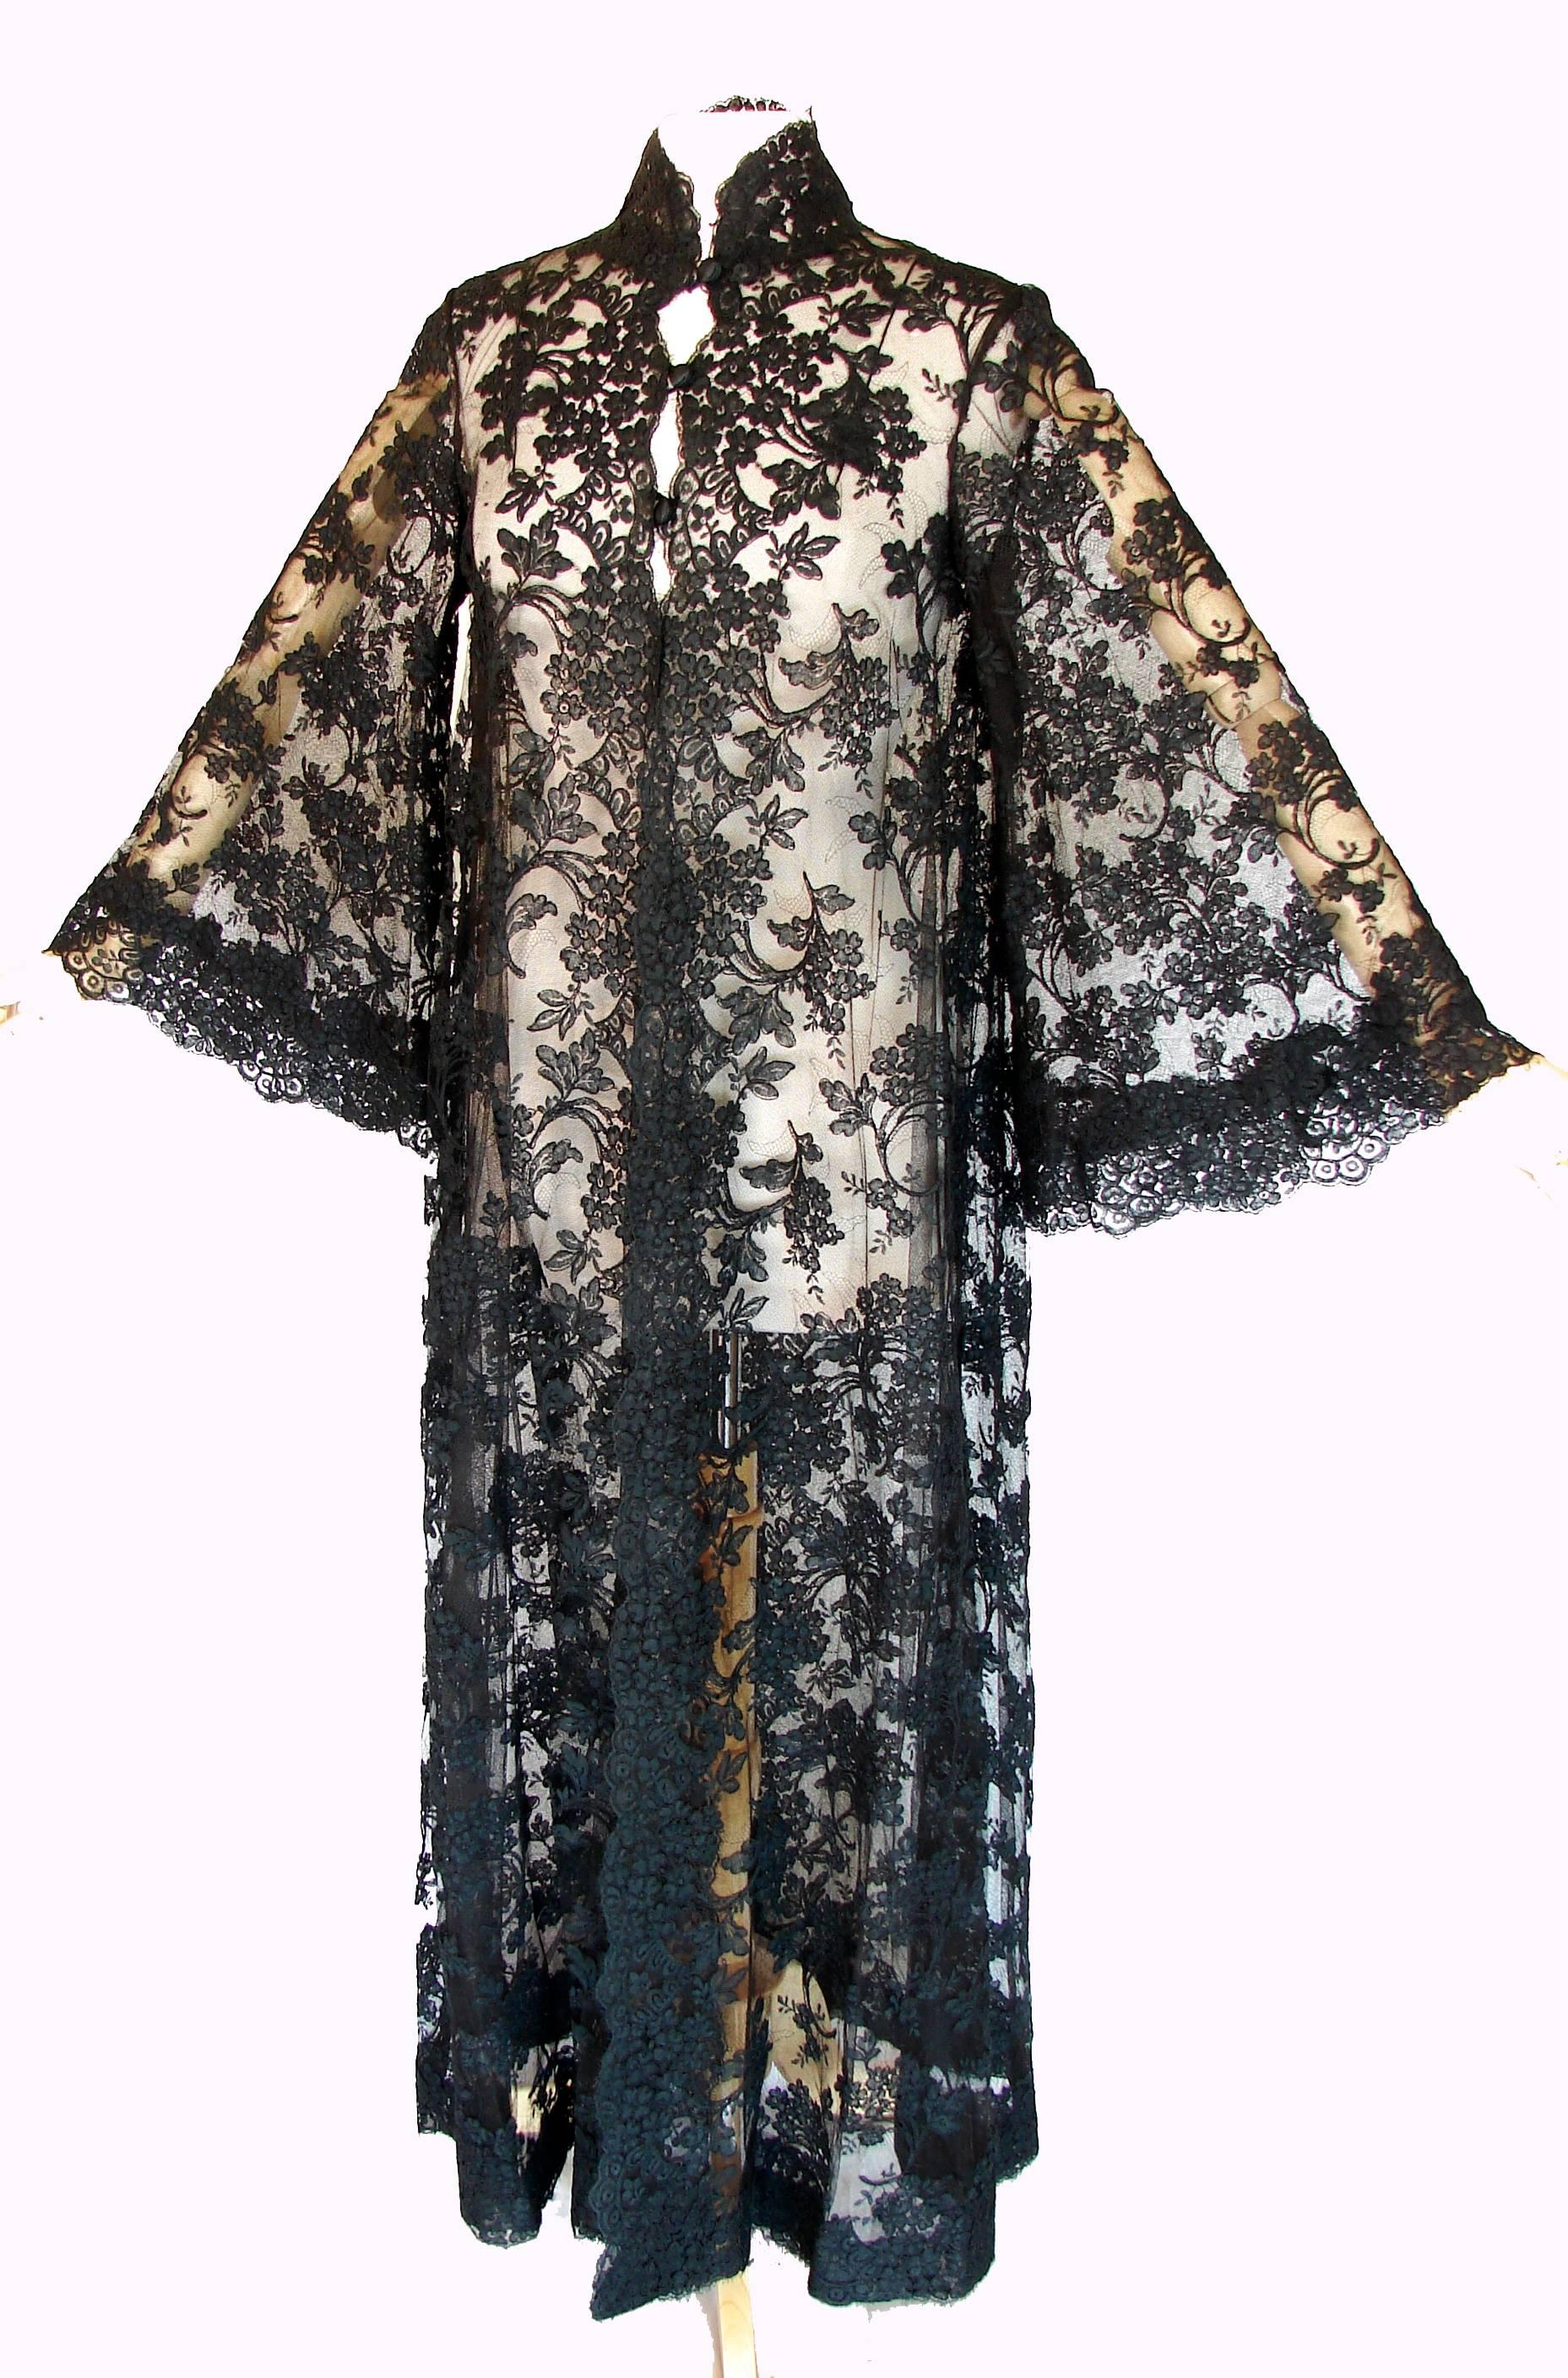 Women's Ron Amey Attr. Fabulous Black Lace Opera Coat with Angel Sleeves Size M 1970s